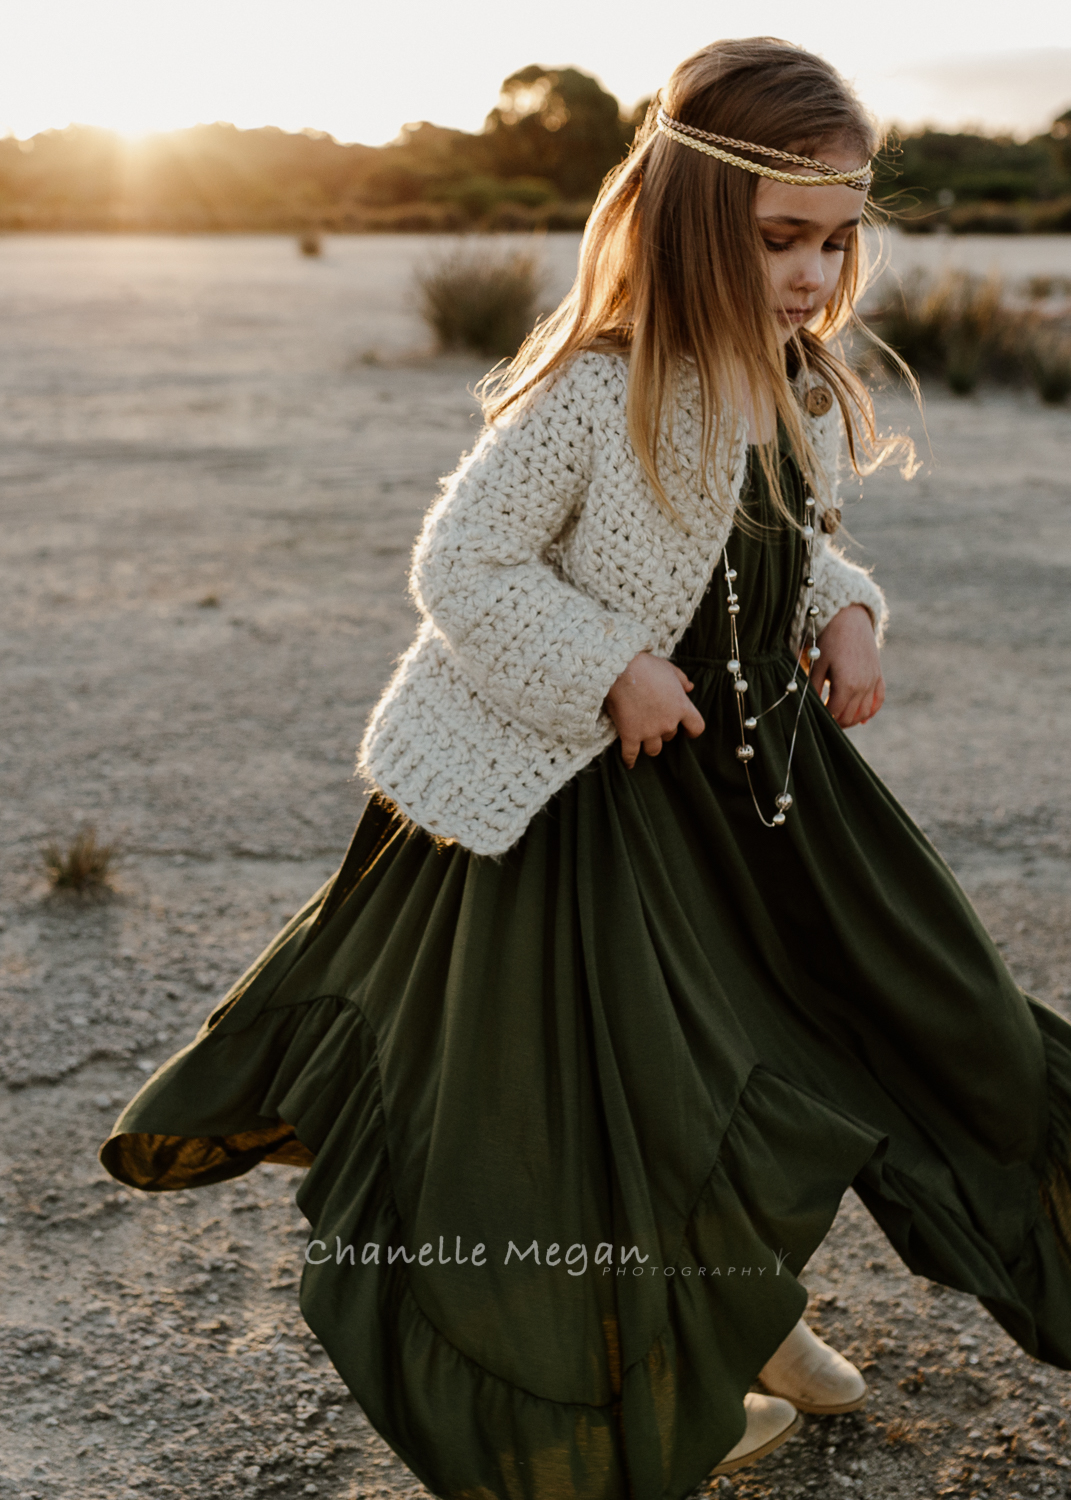 Chanelle Megan Photography captures candid photography of your children